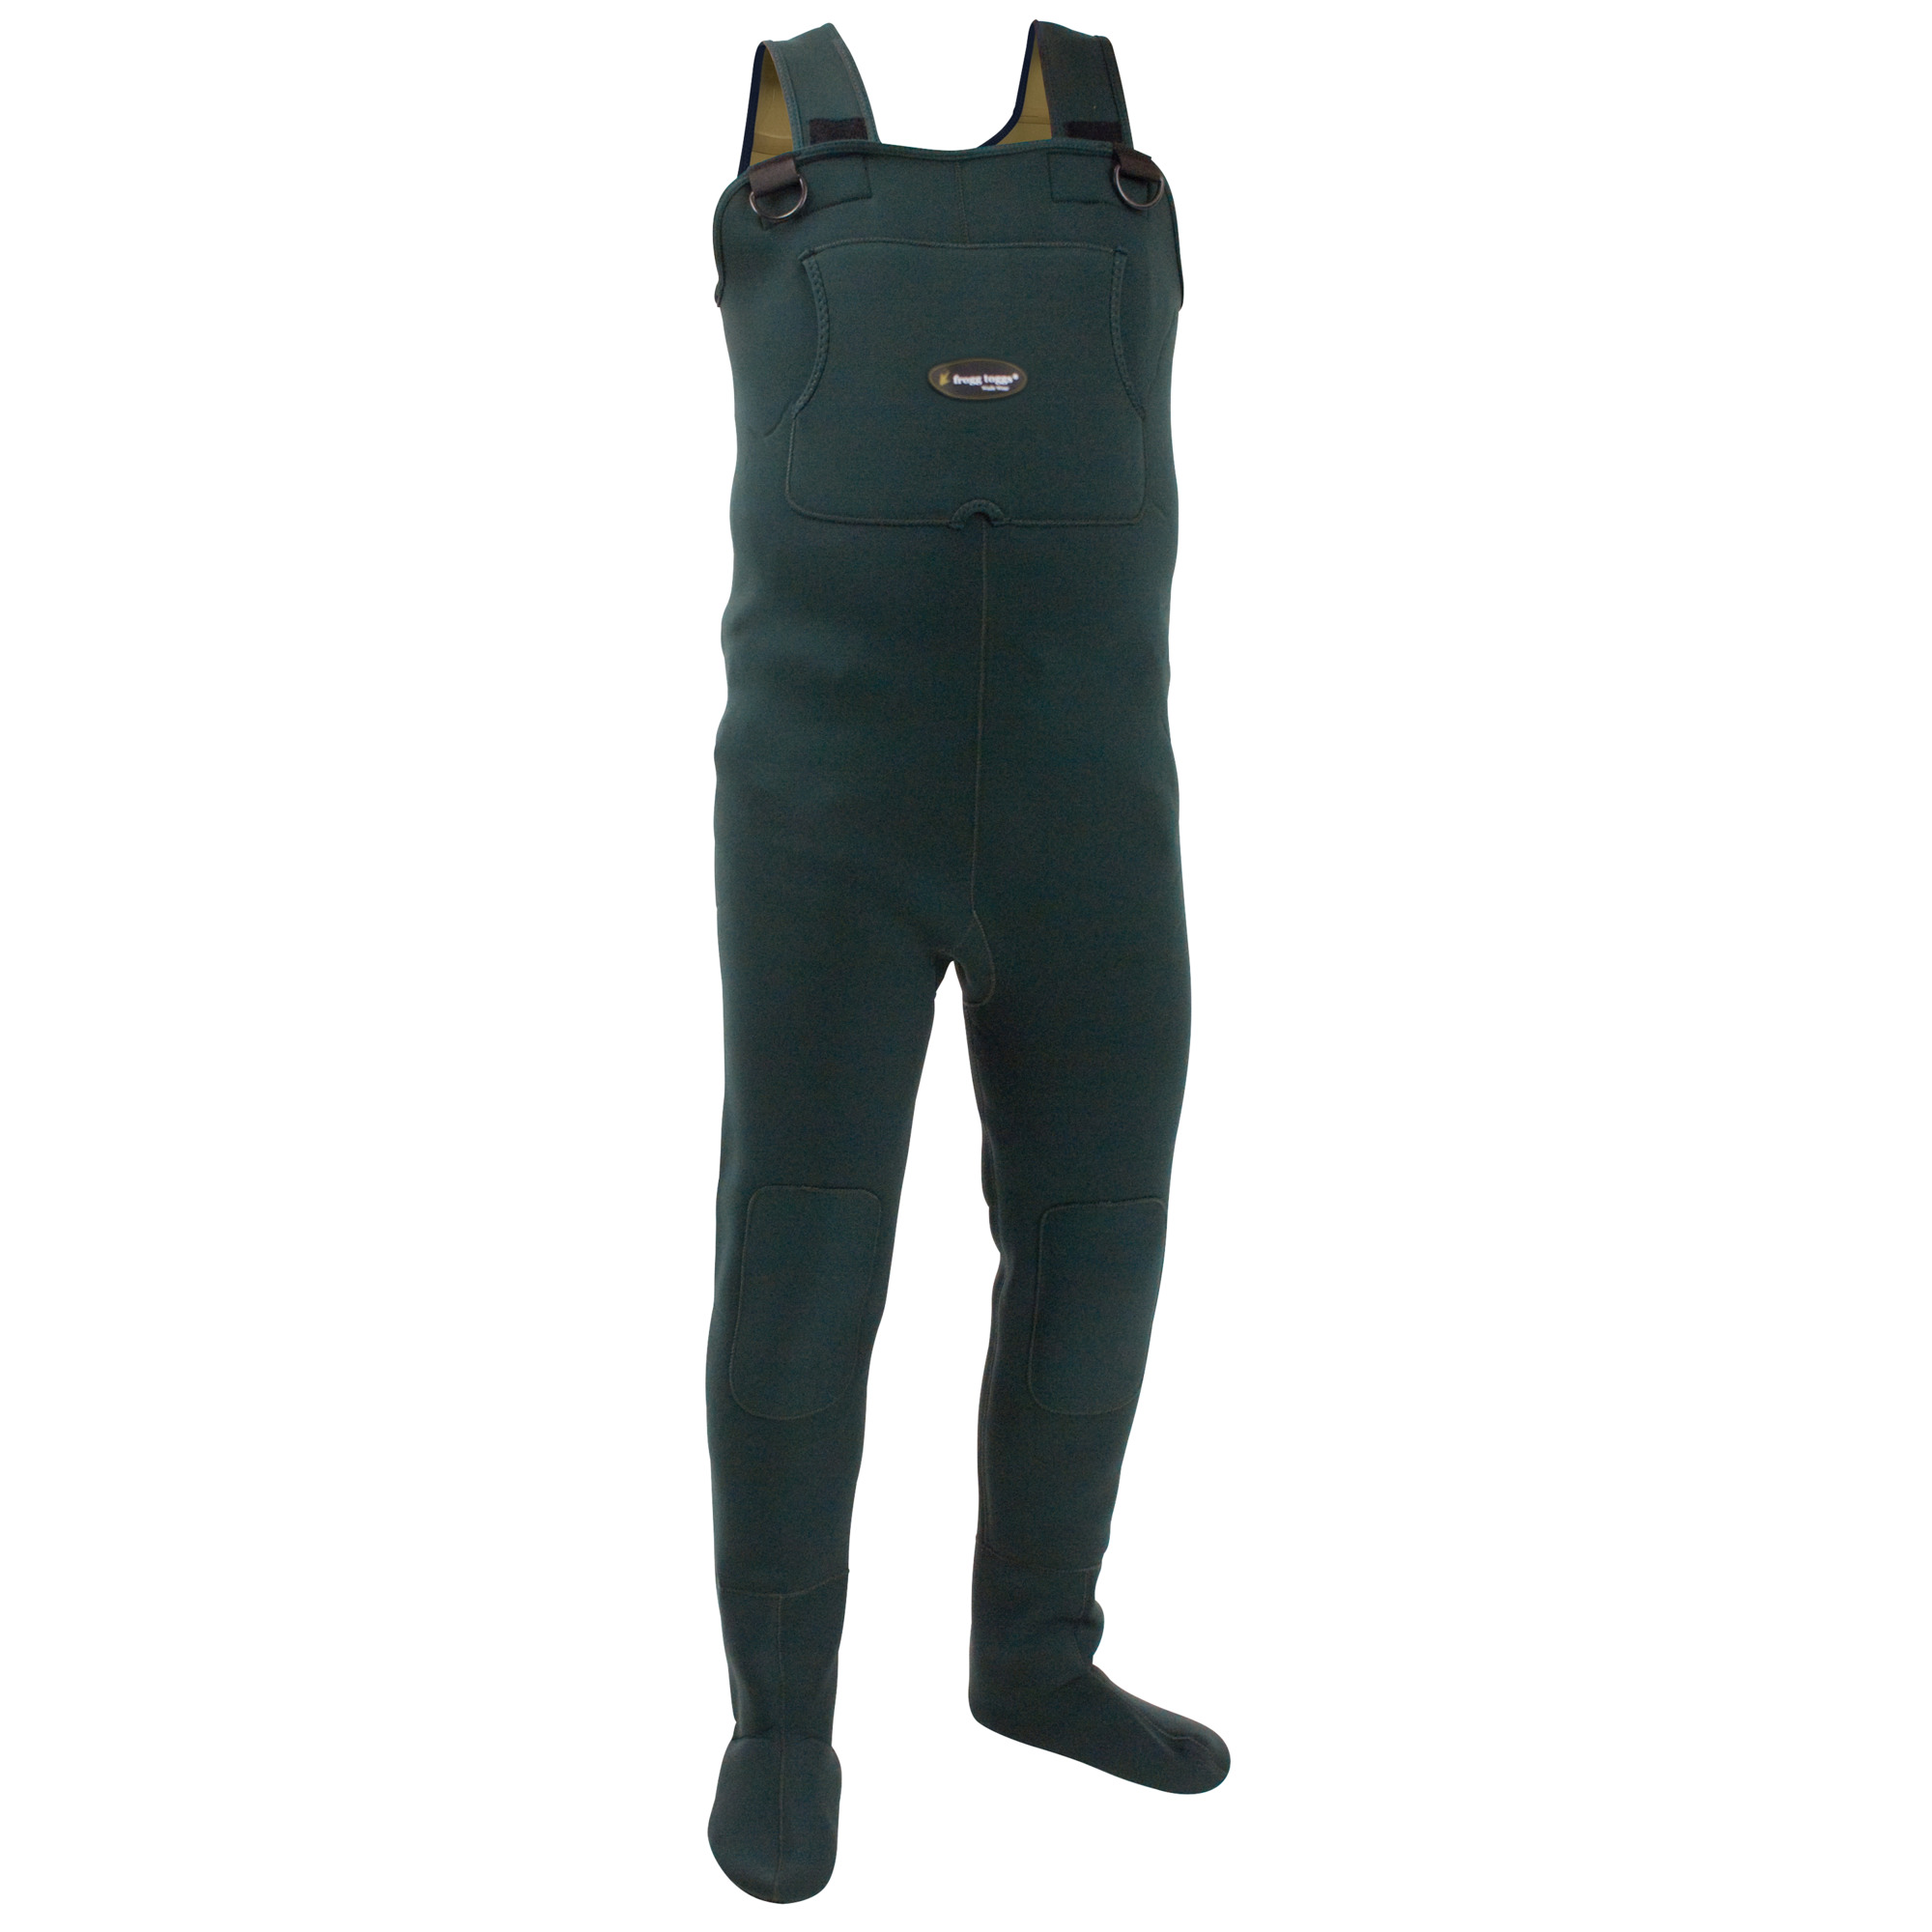 frogg toggs, Amphib Neoprene Stockingfoot Chest Wader, Size XL, Width Medium, Color Forest Green, Model 2713143-XL